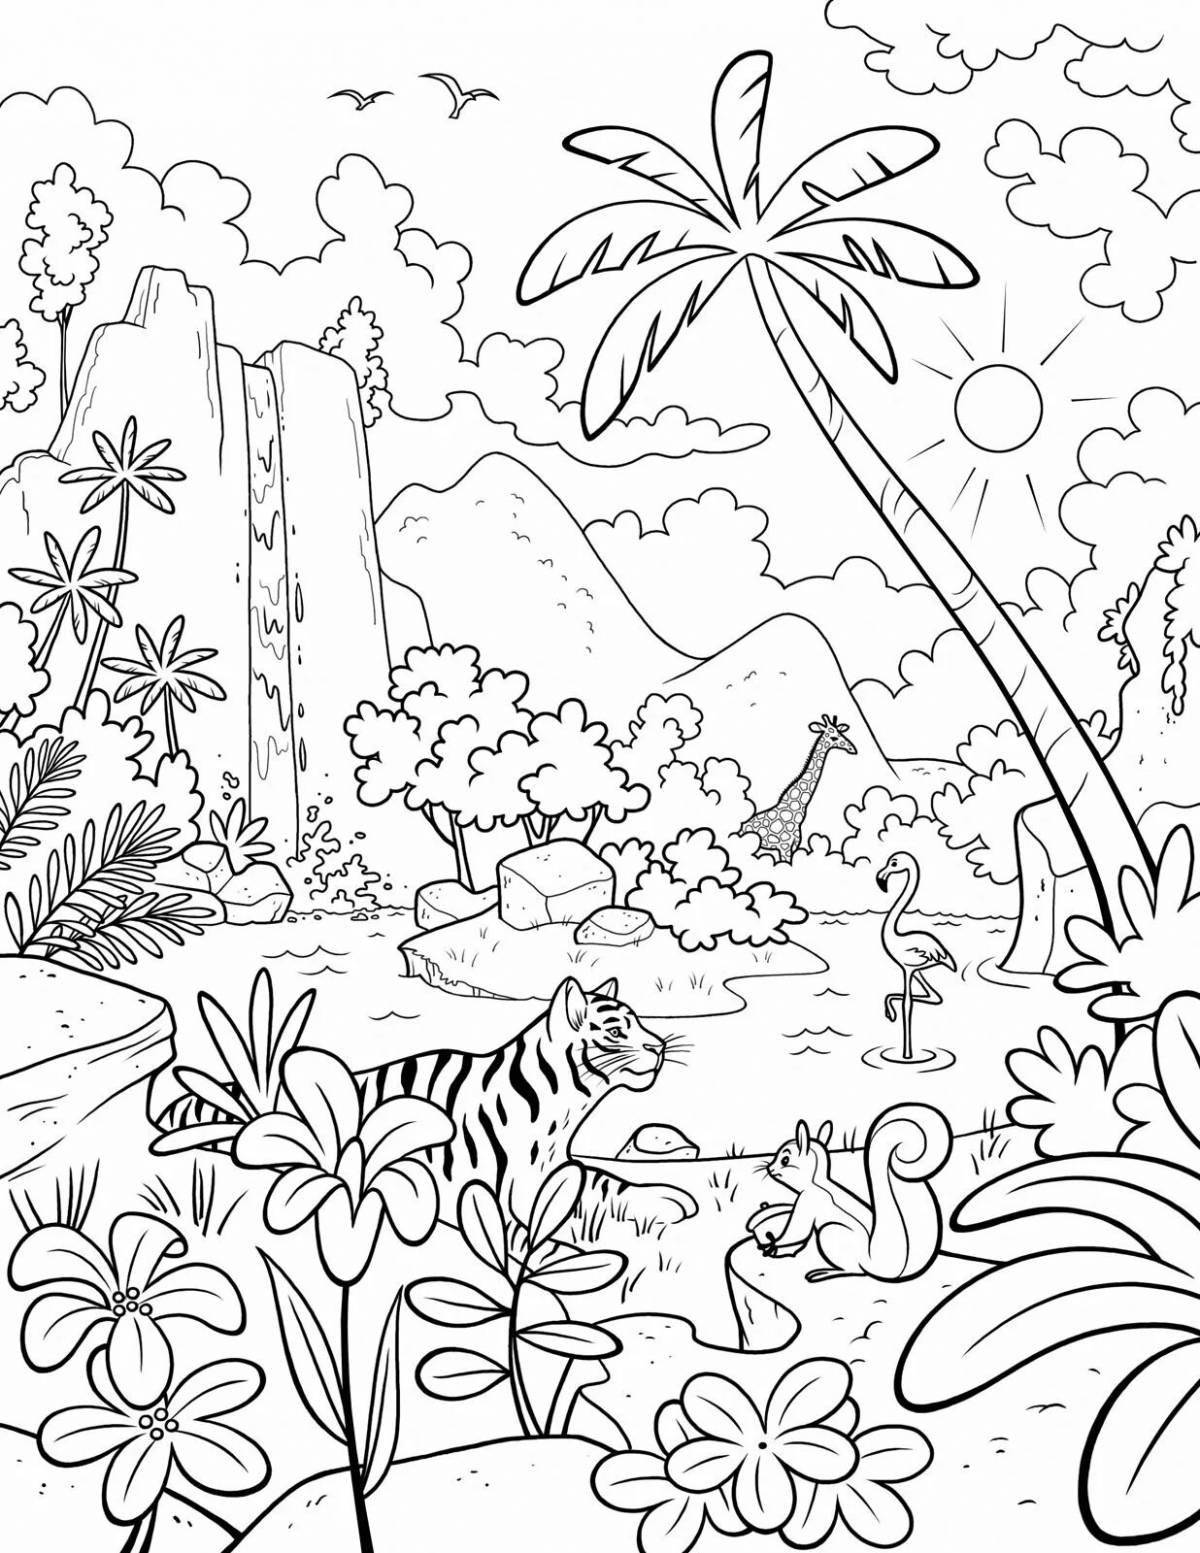 Majestic summer nature coloring book